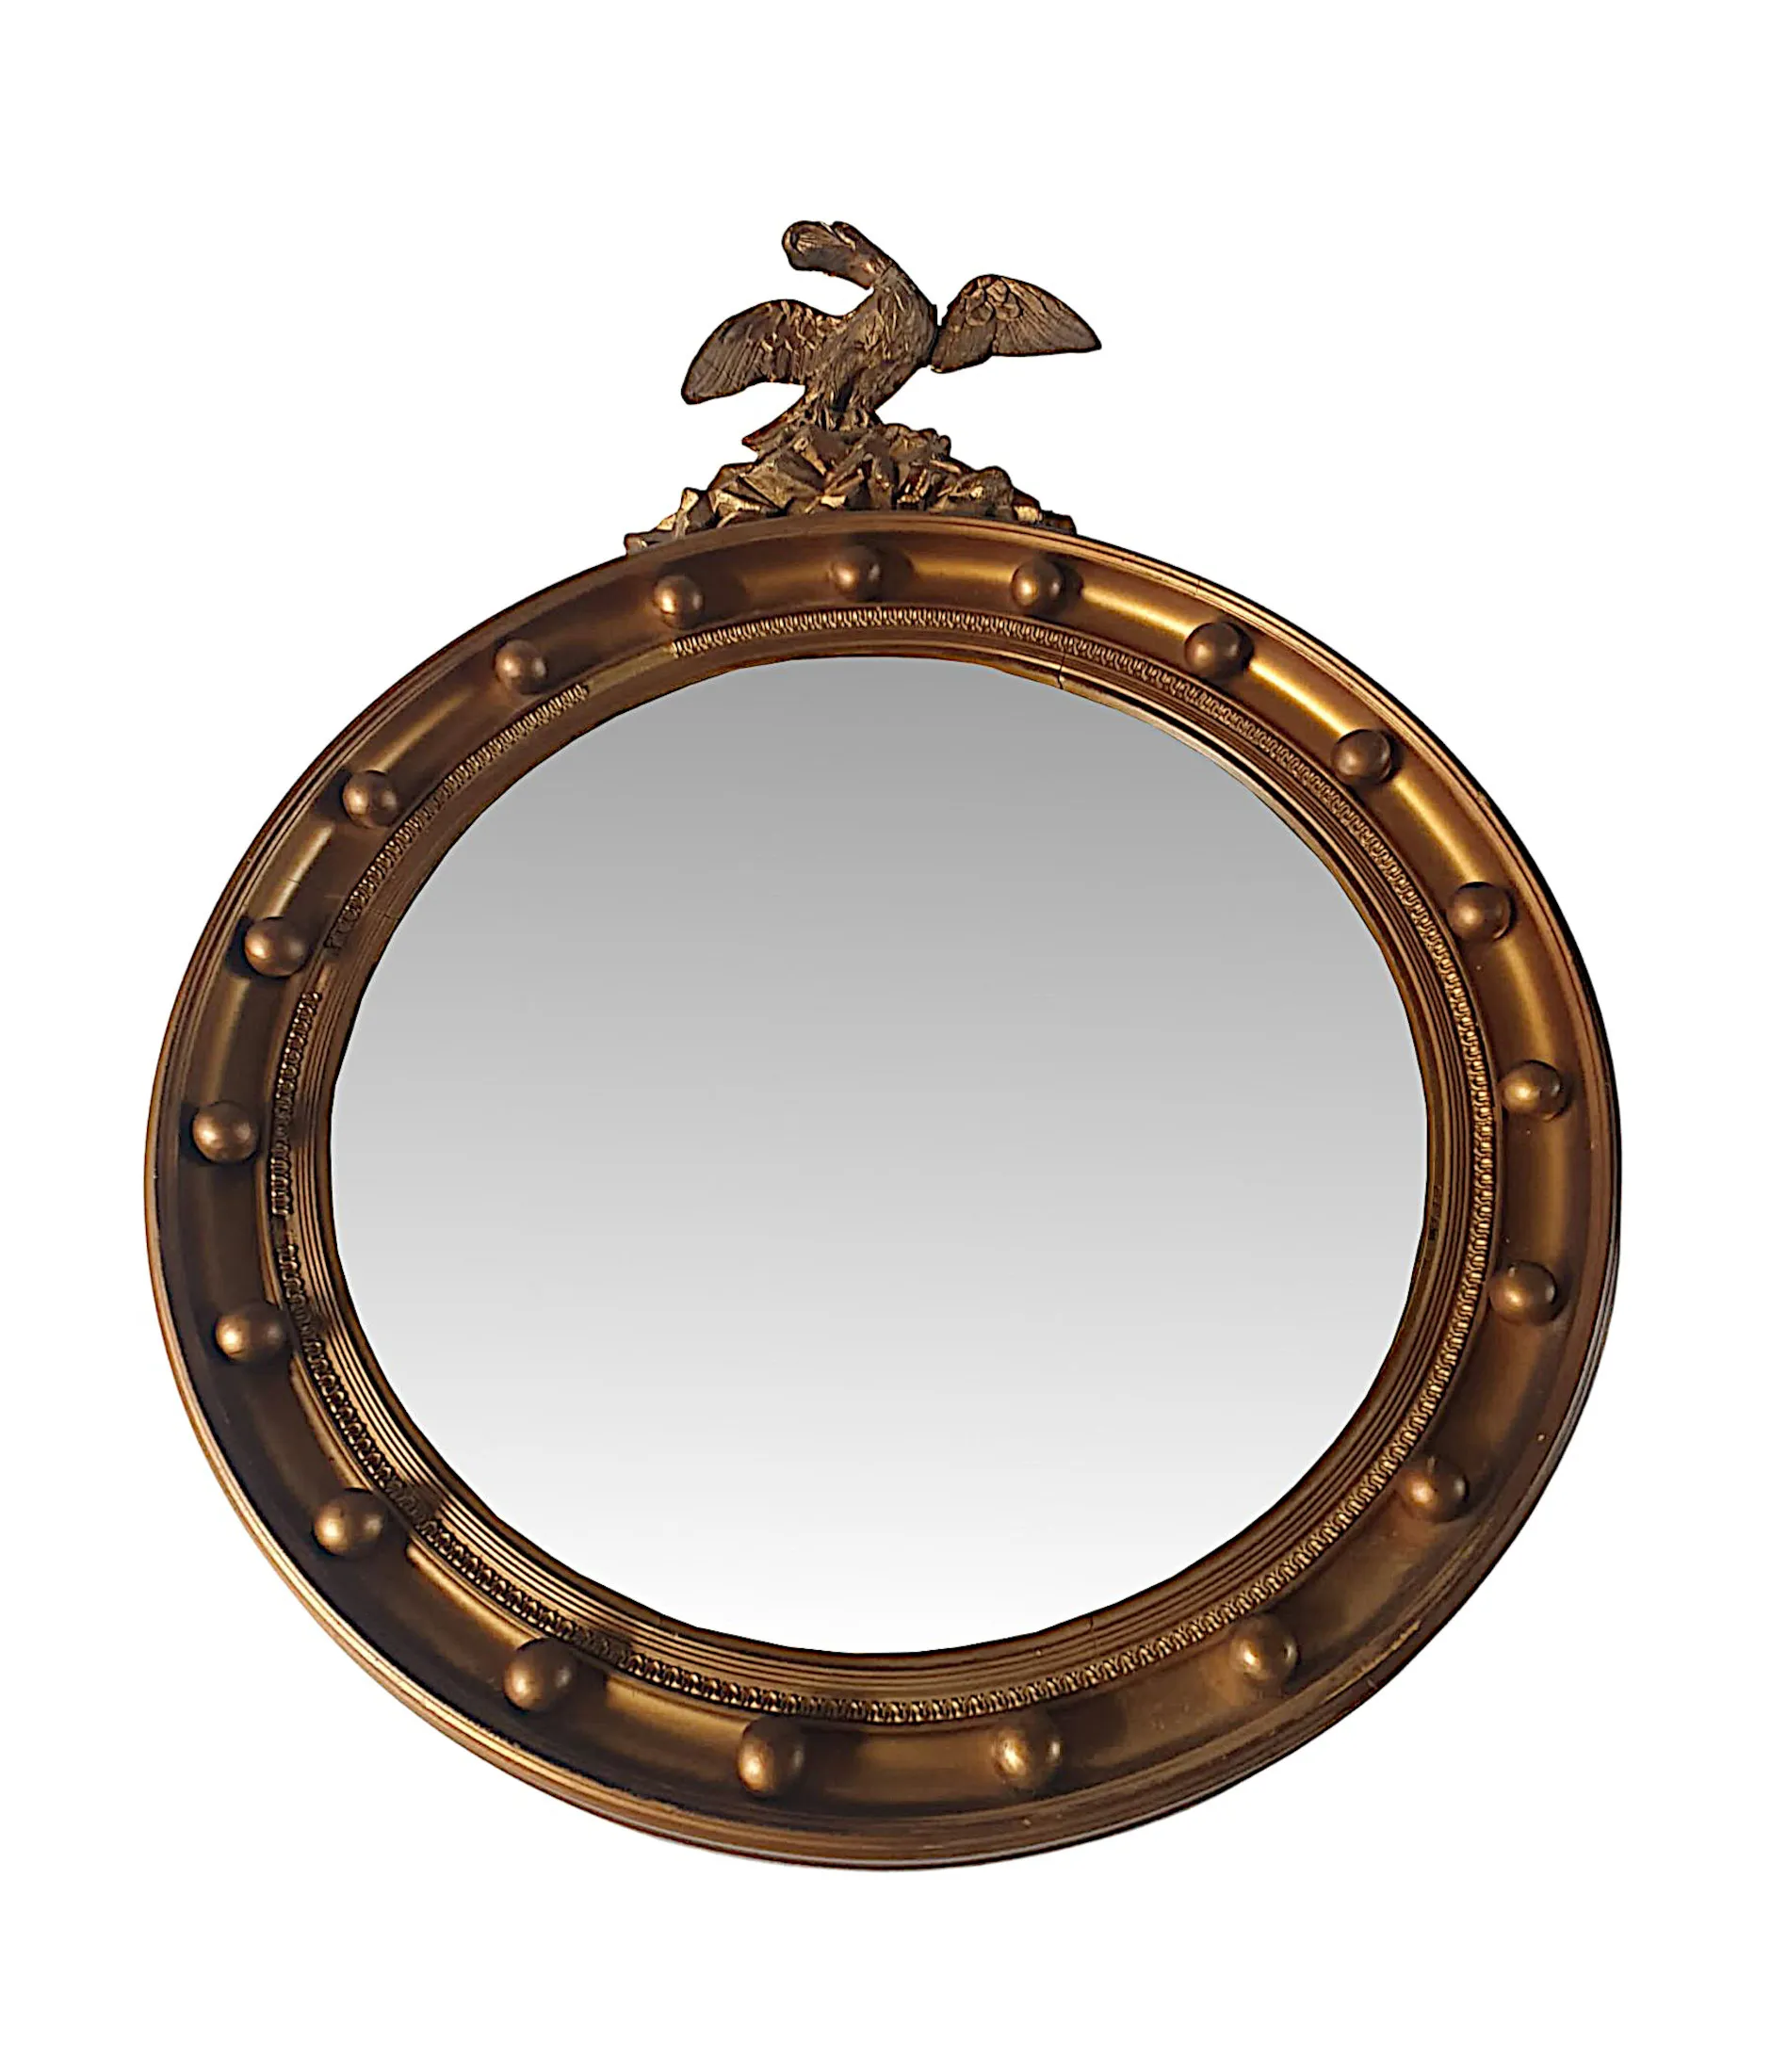 A Stunning 19th Century Giltwood Mirror with Eagle Crest